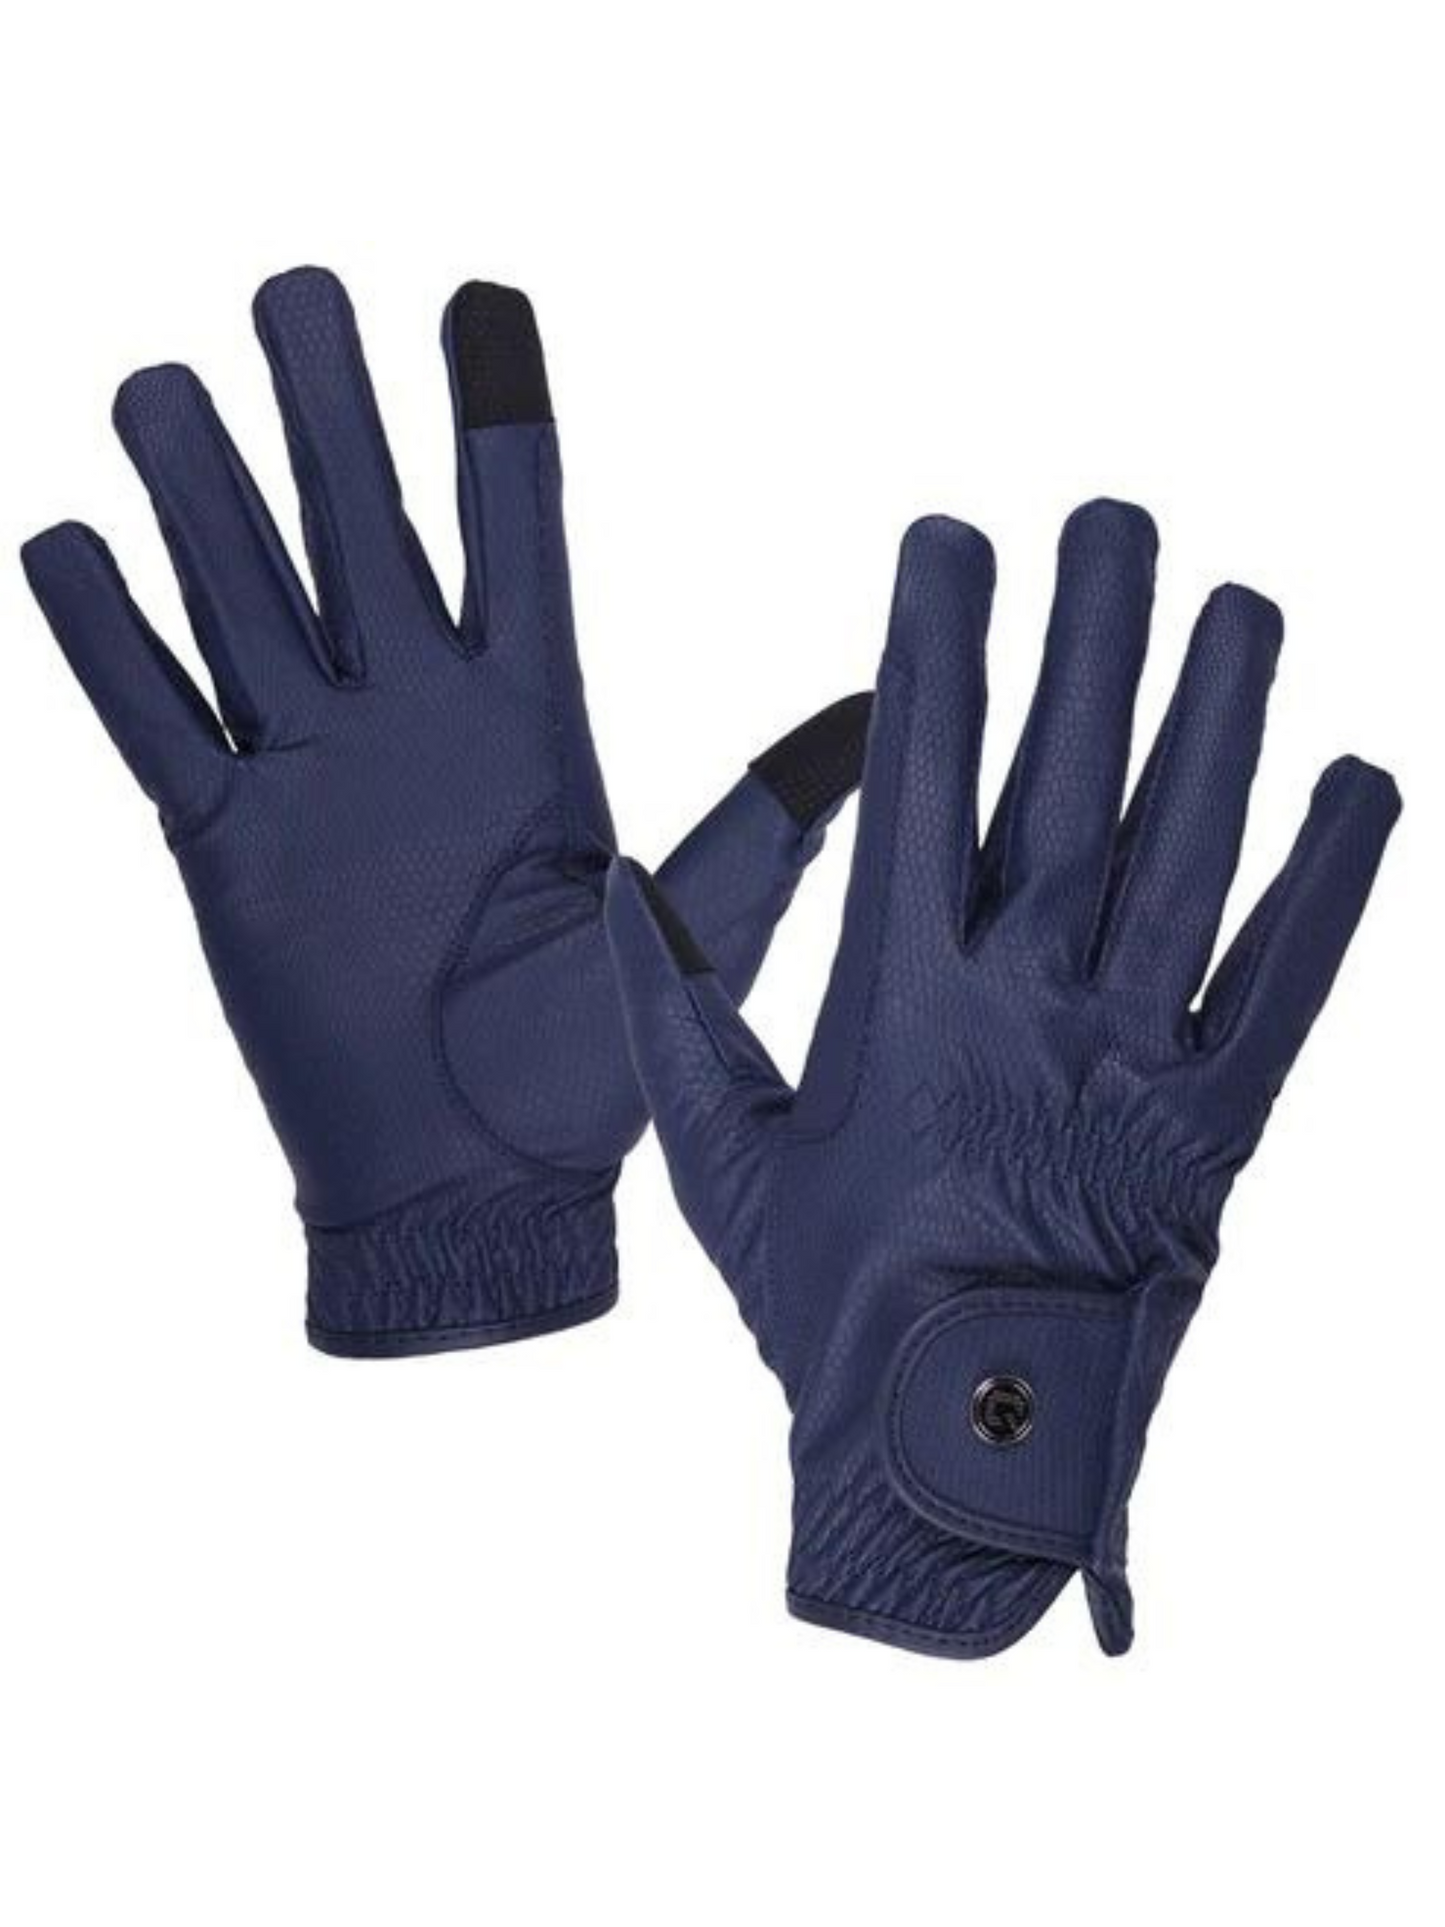 QHP Glove Force (Black, Navy, and White)